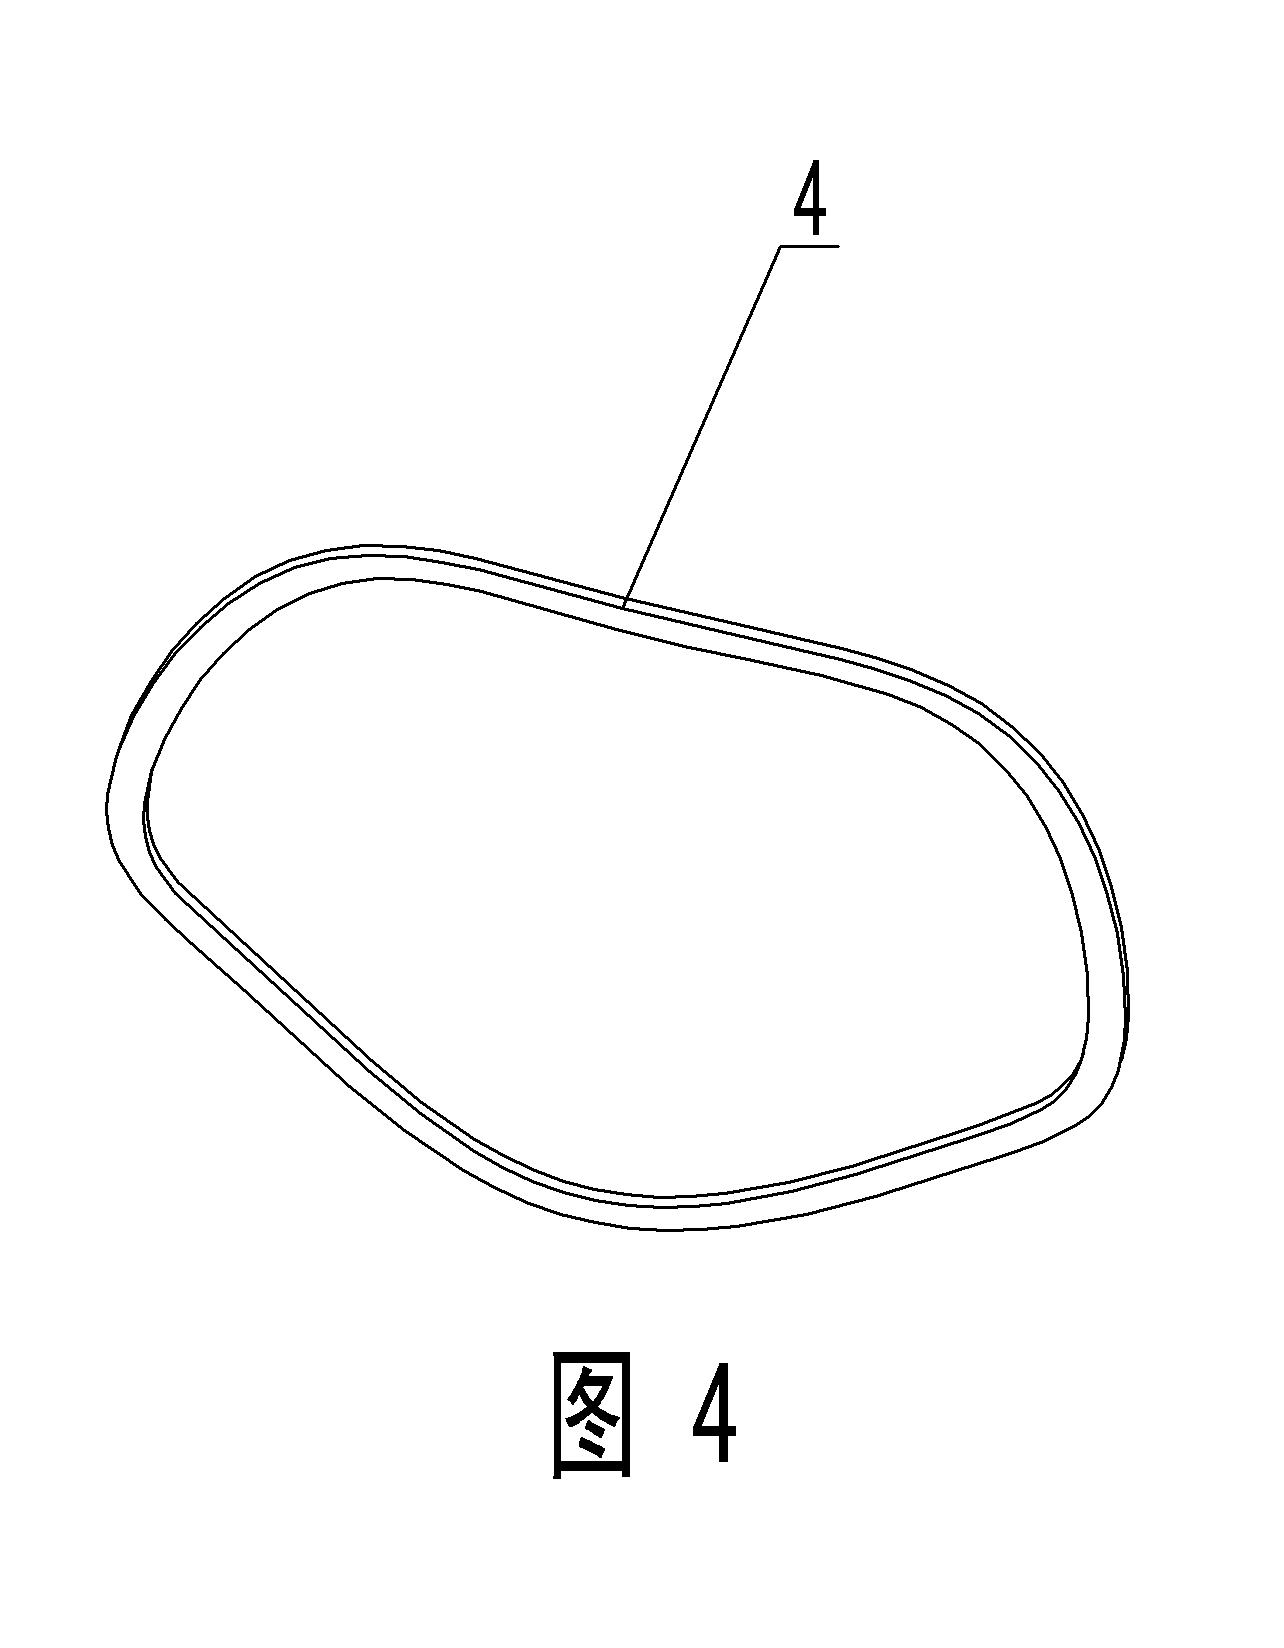 Lock type sealing electrical connector for curved groove